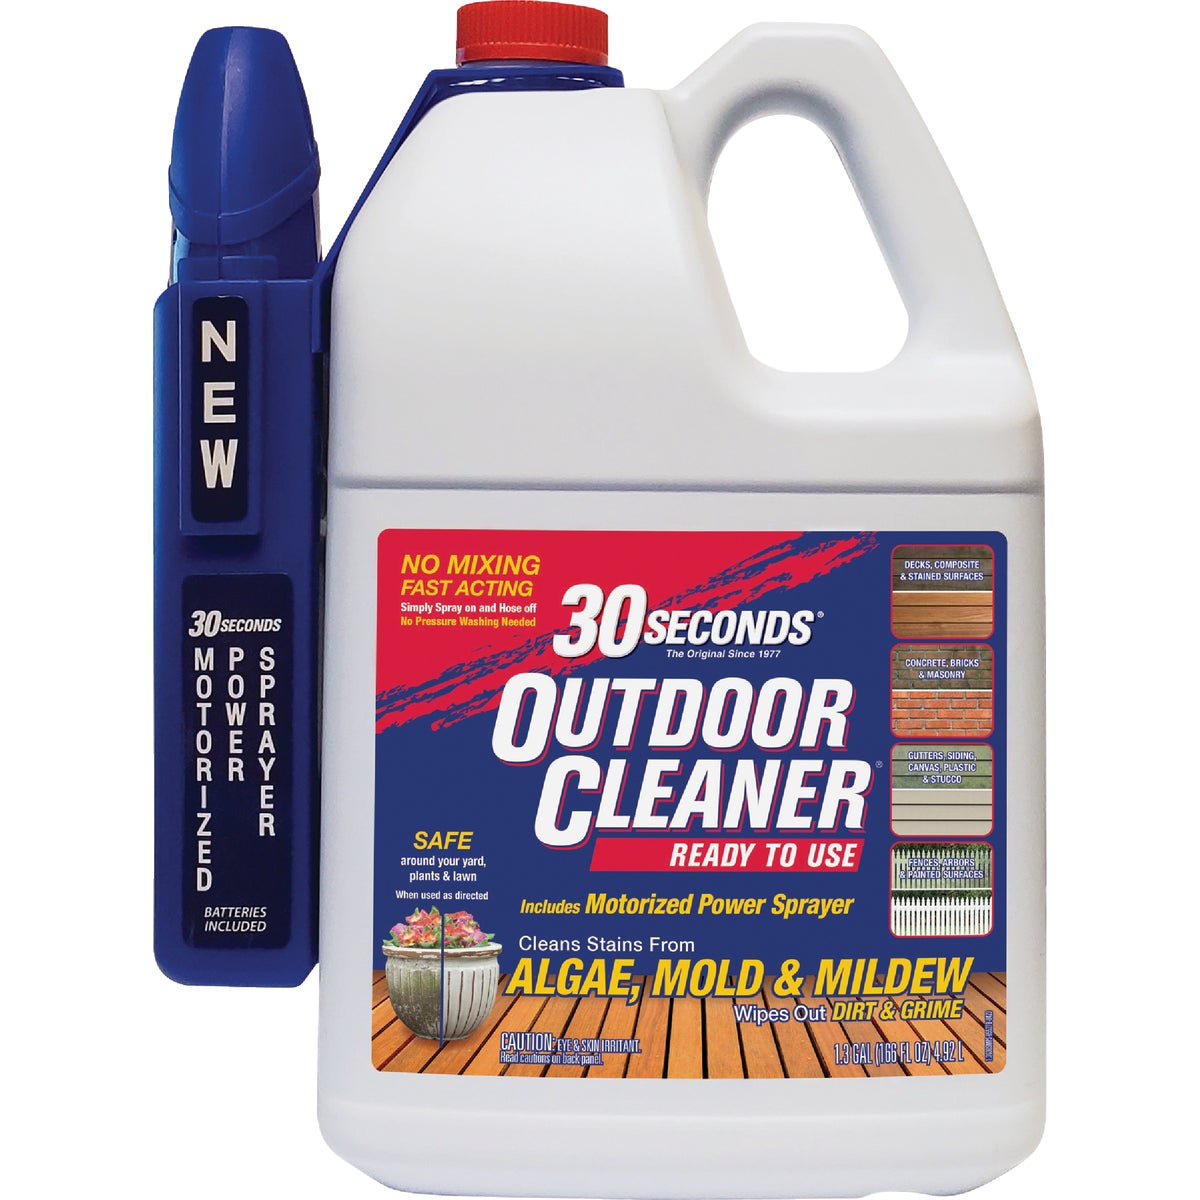 30 seconds Outdoor Cleaner 1.3 Gal. Ready To Use Power Sprayer Algae, Mold & Mildew Stain Remover